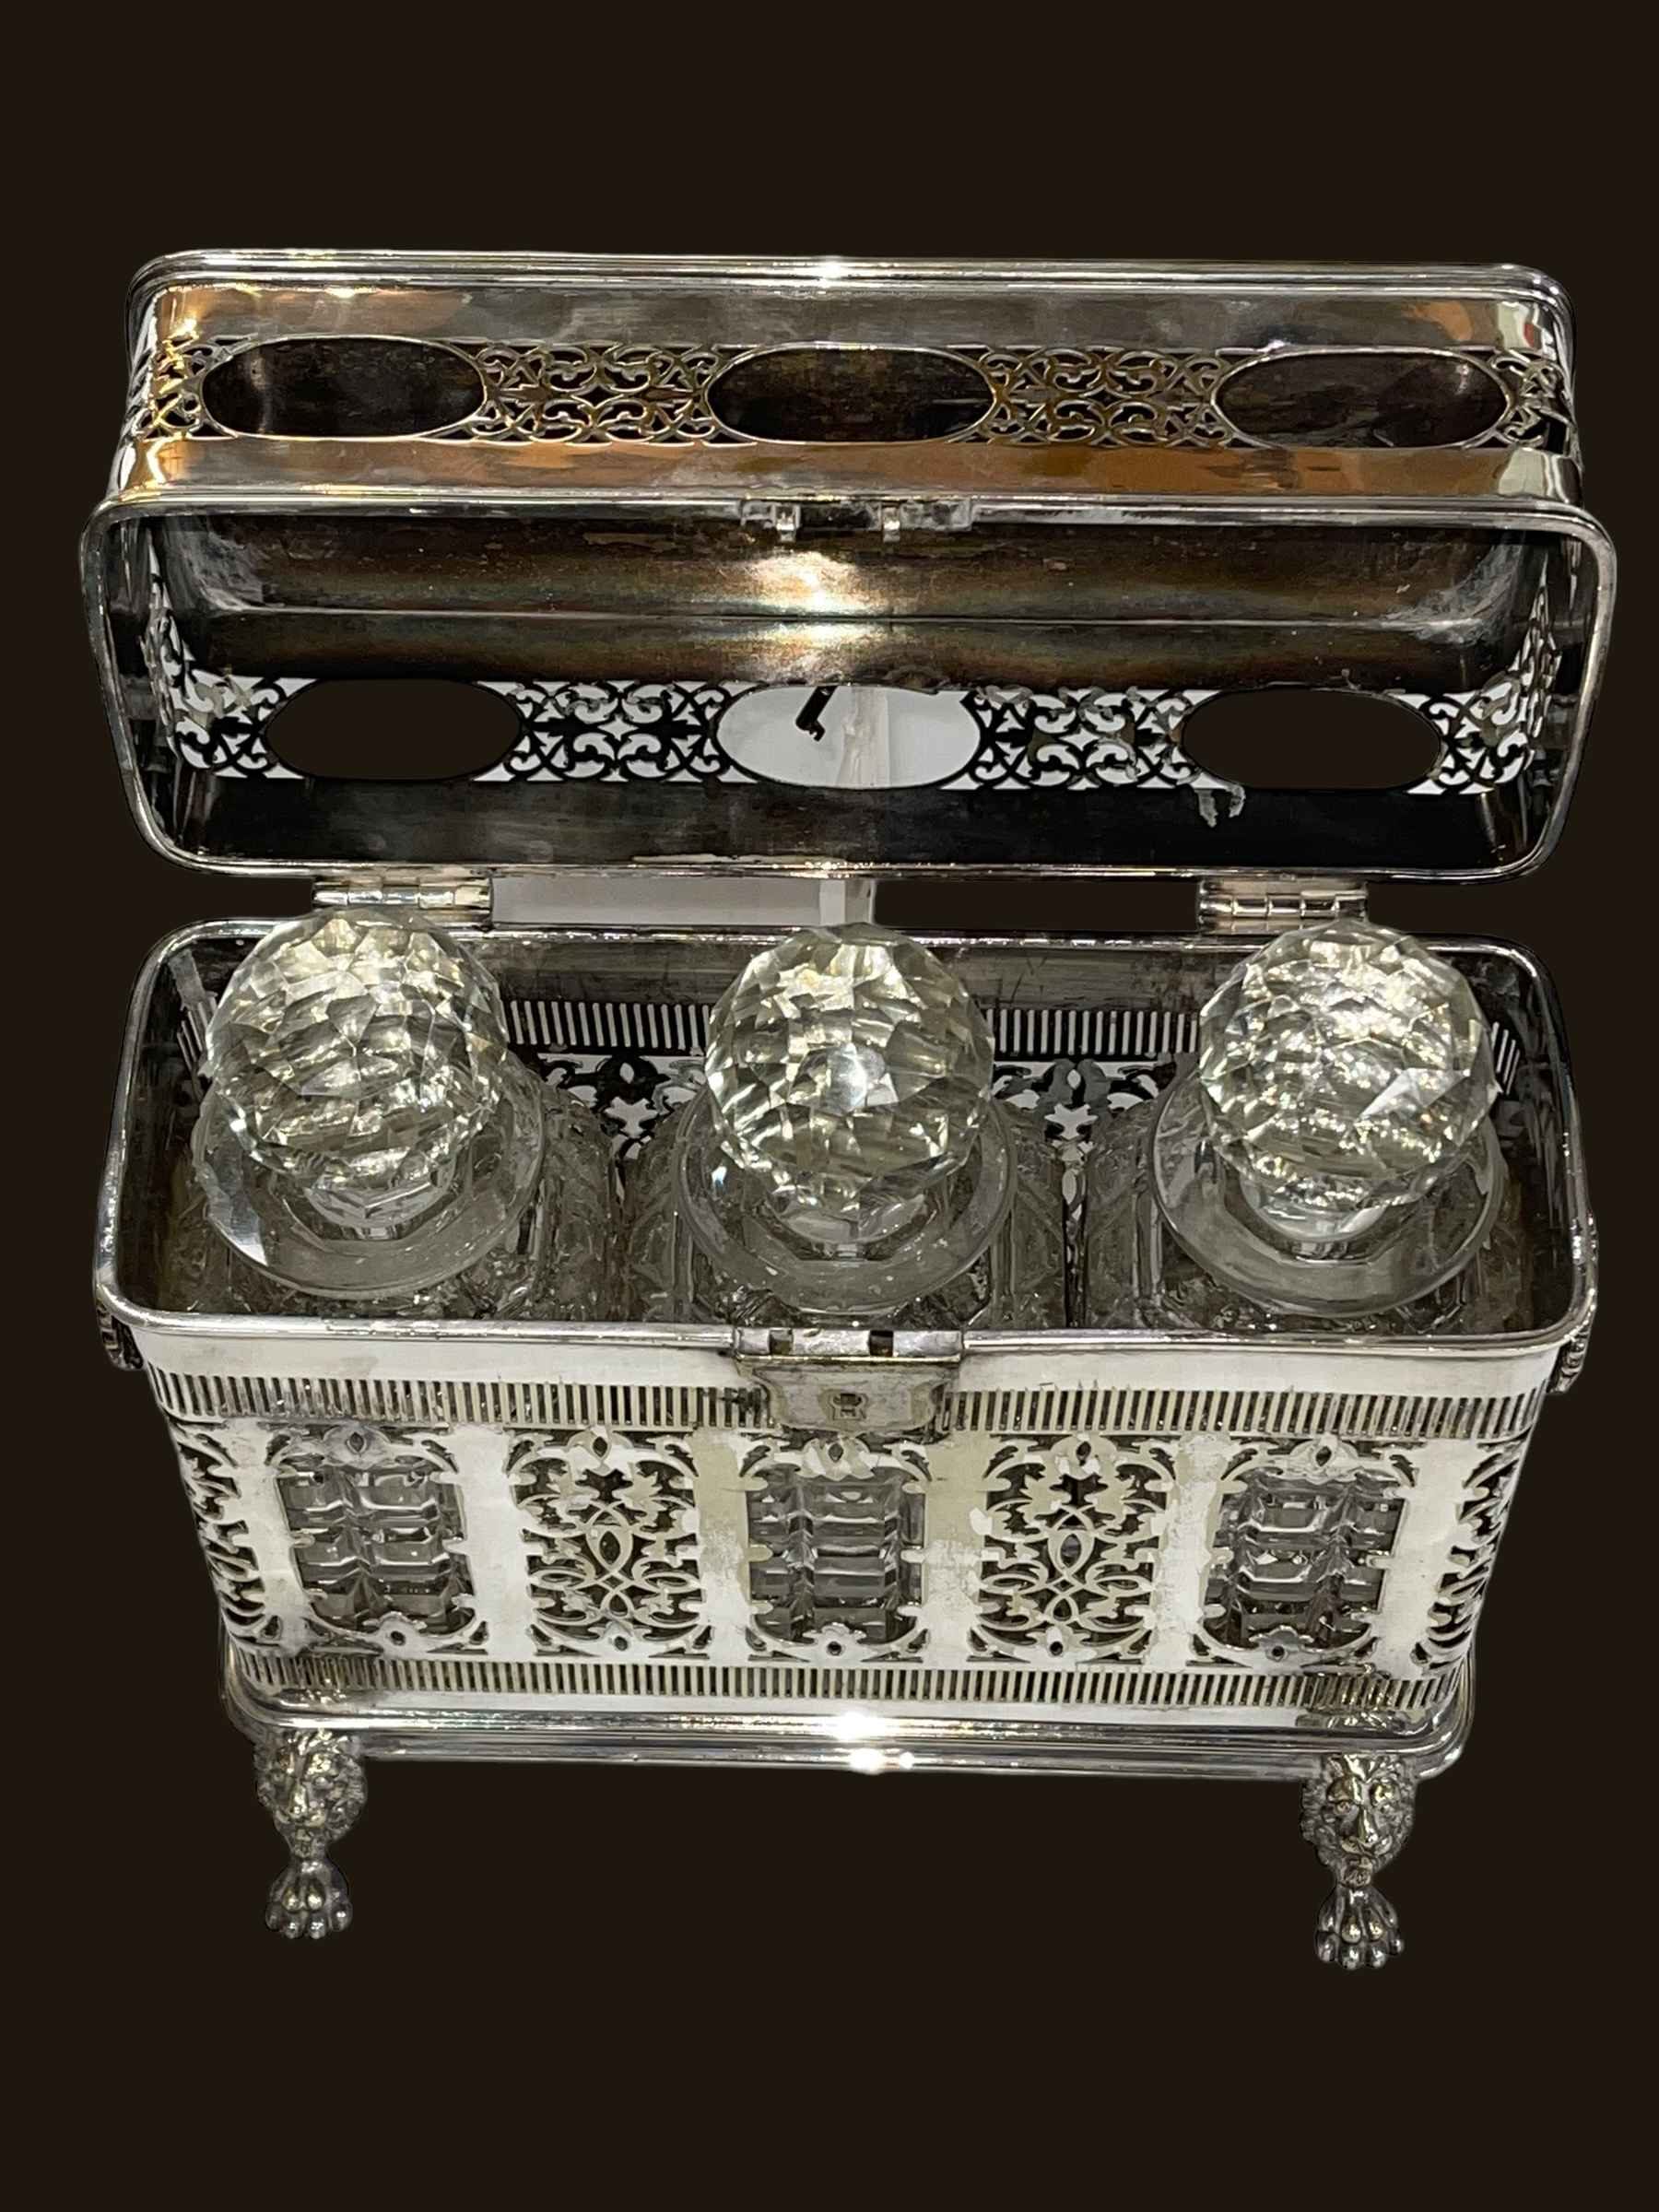 Ornate Sheffield plate engraved decanter box raised on four lion mask and paw feet, - Image 2 of 2